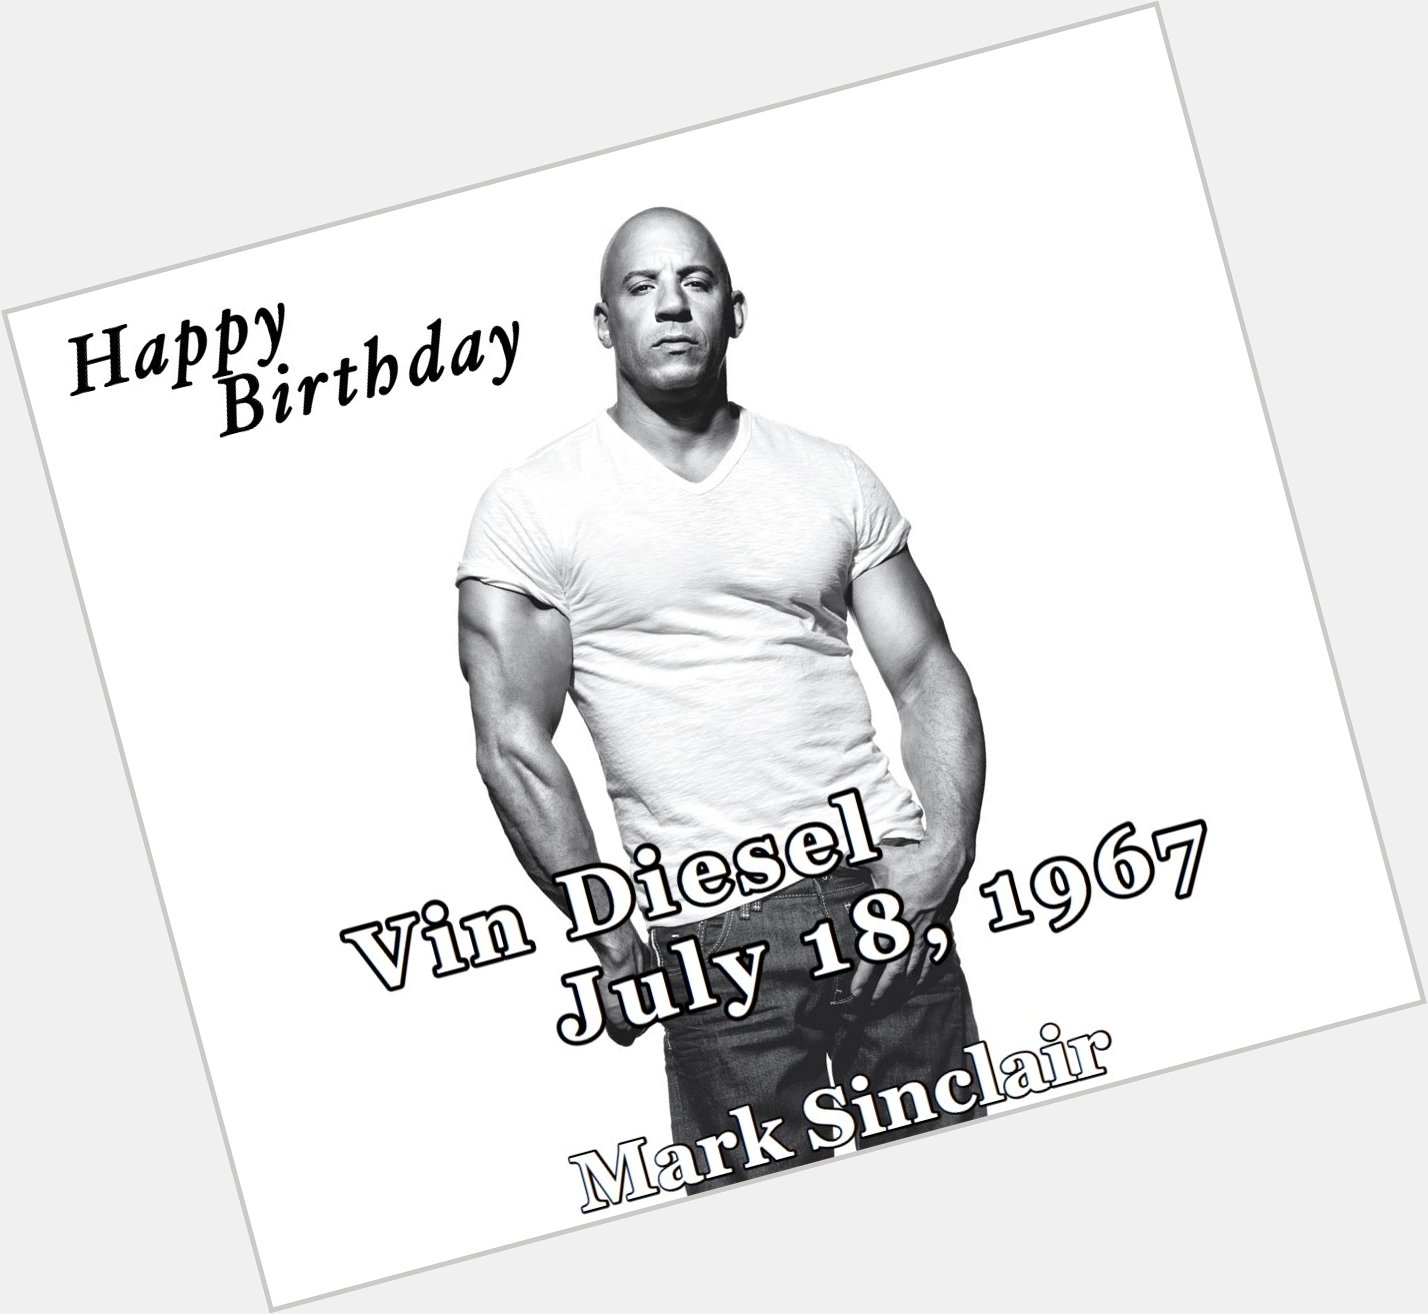 Happy Birthday Vin Diesel, is an American actor, producer, director and screenwriter. 